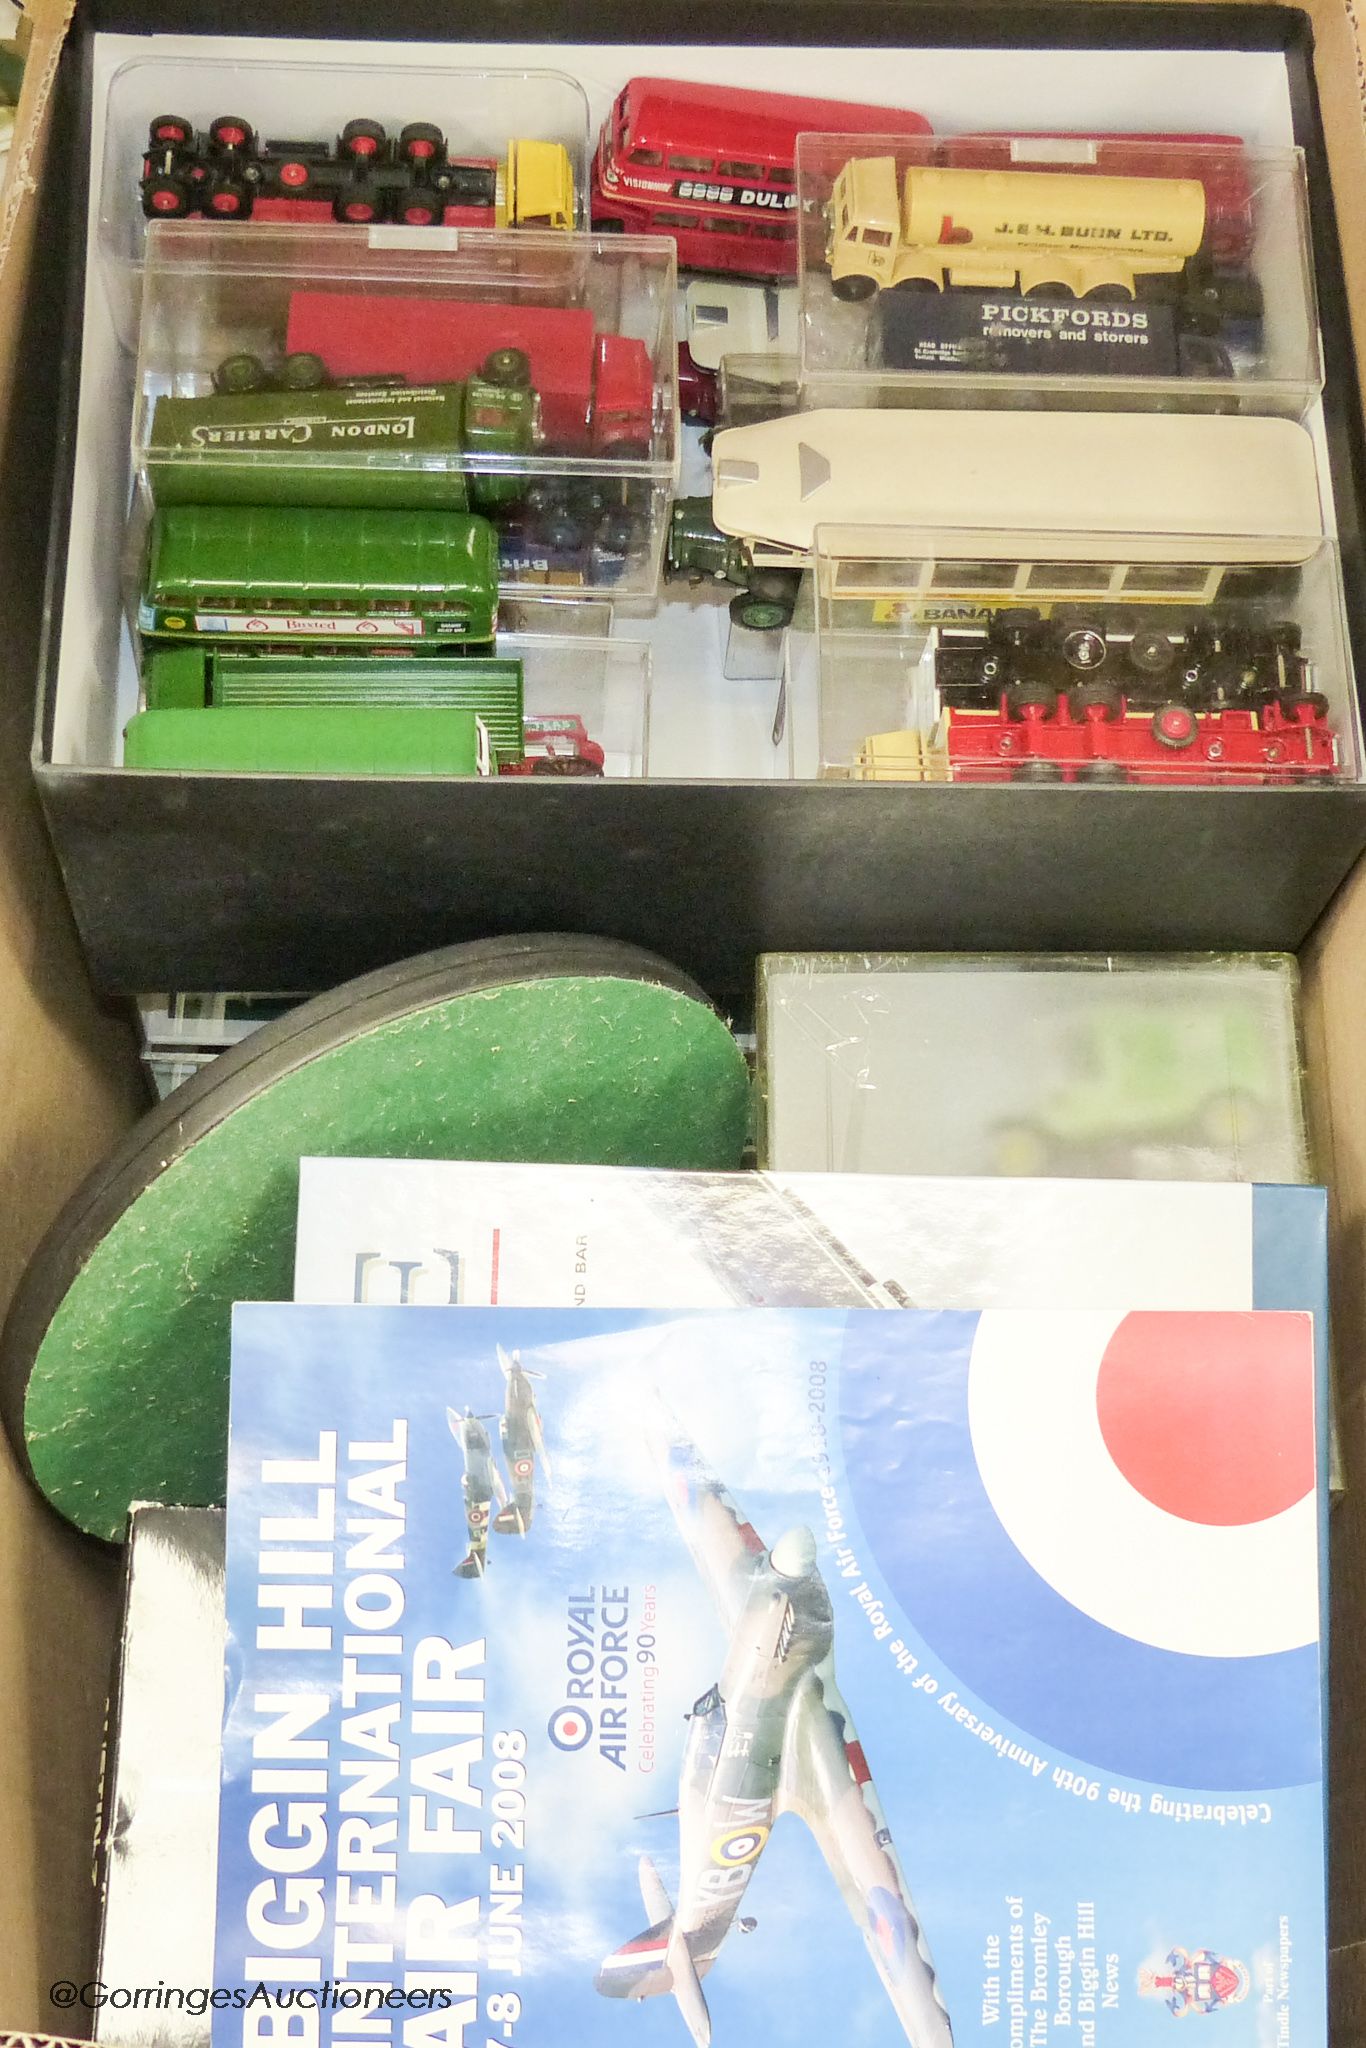 A collection of unboxed Corgi aviation models to include a large Lancaster in associated bespoke display case, the Heinkel HE 111, Stuka (x3), D H (de Havilland) Mosquito x2, together with others and a collection of die